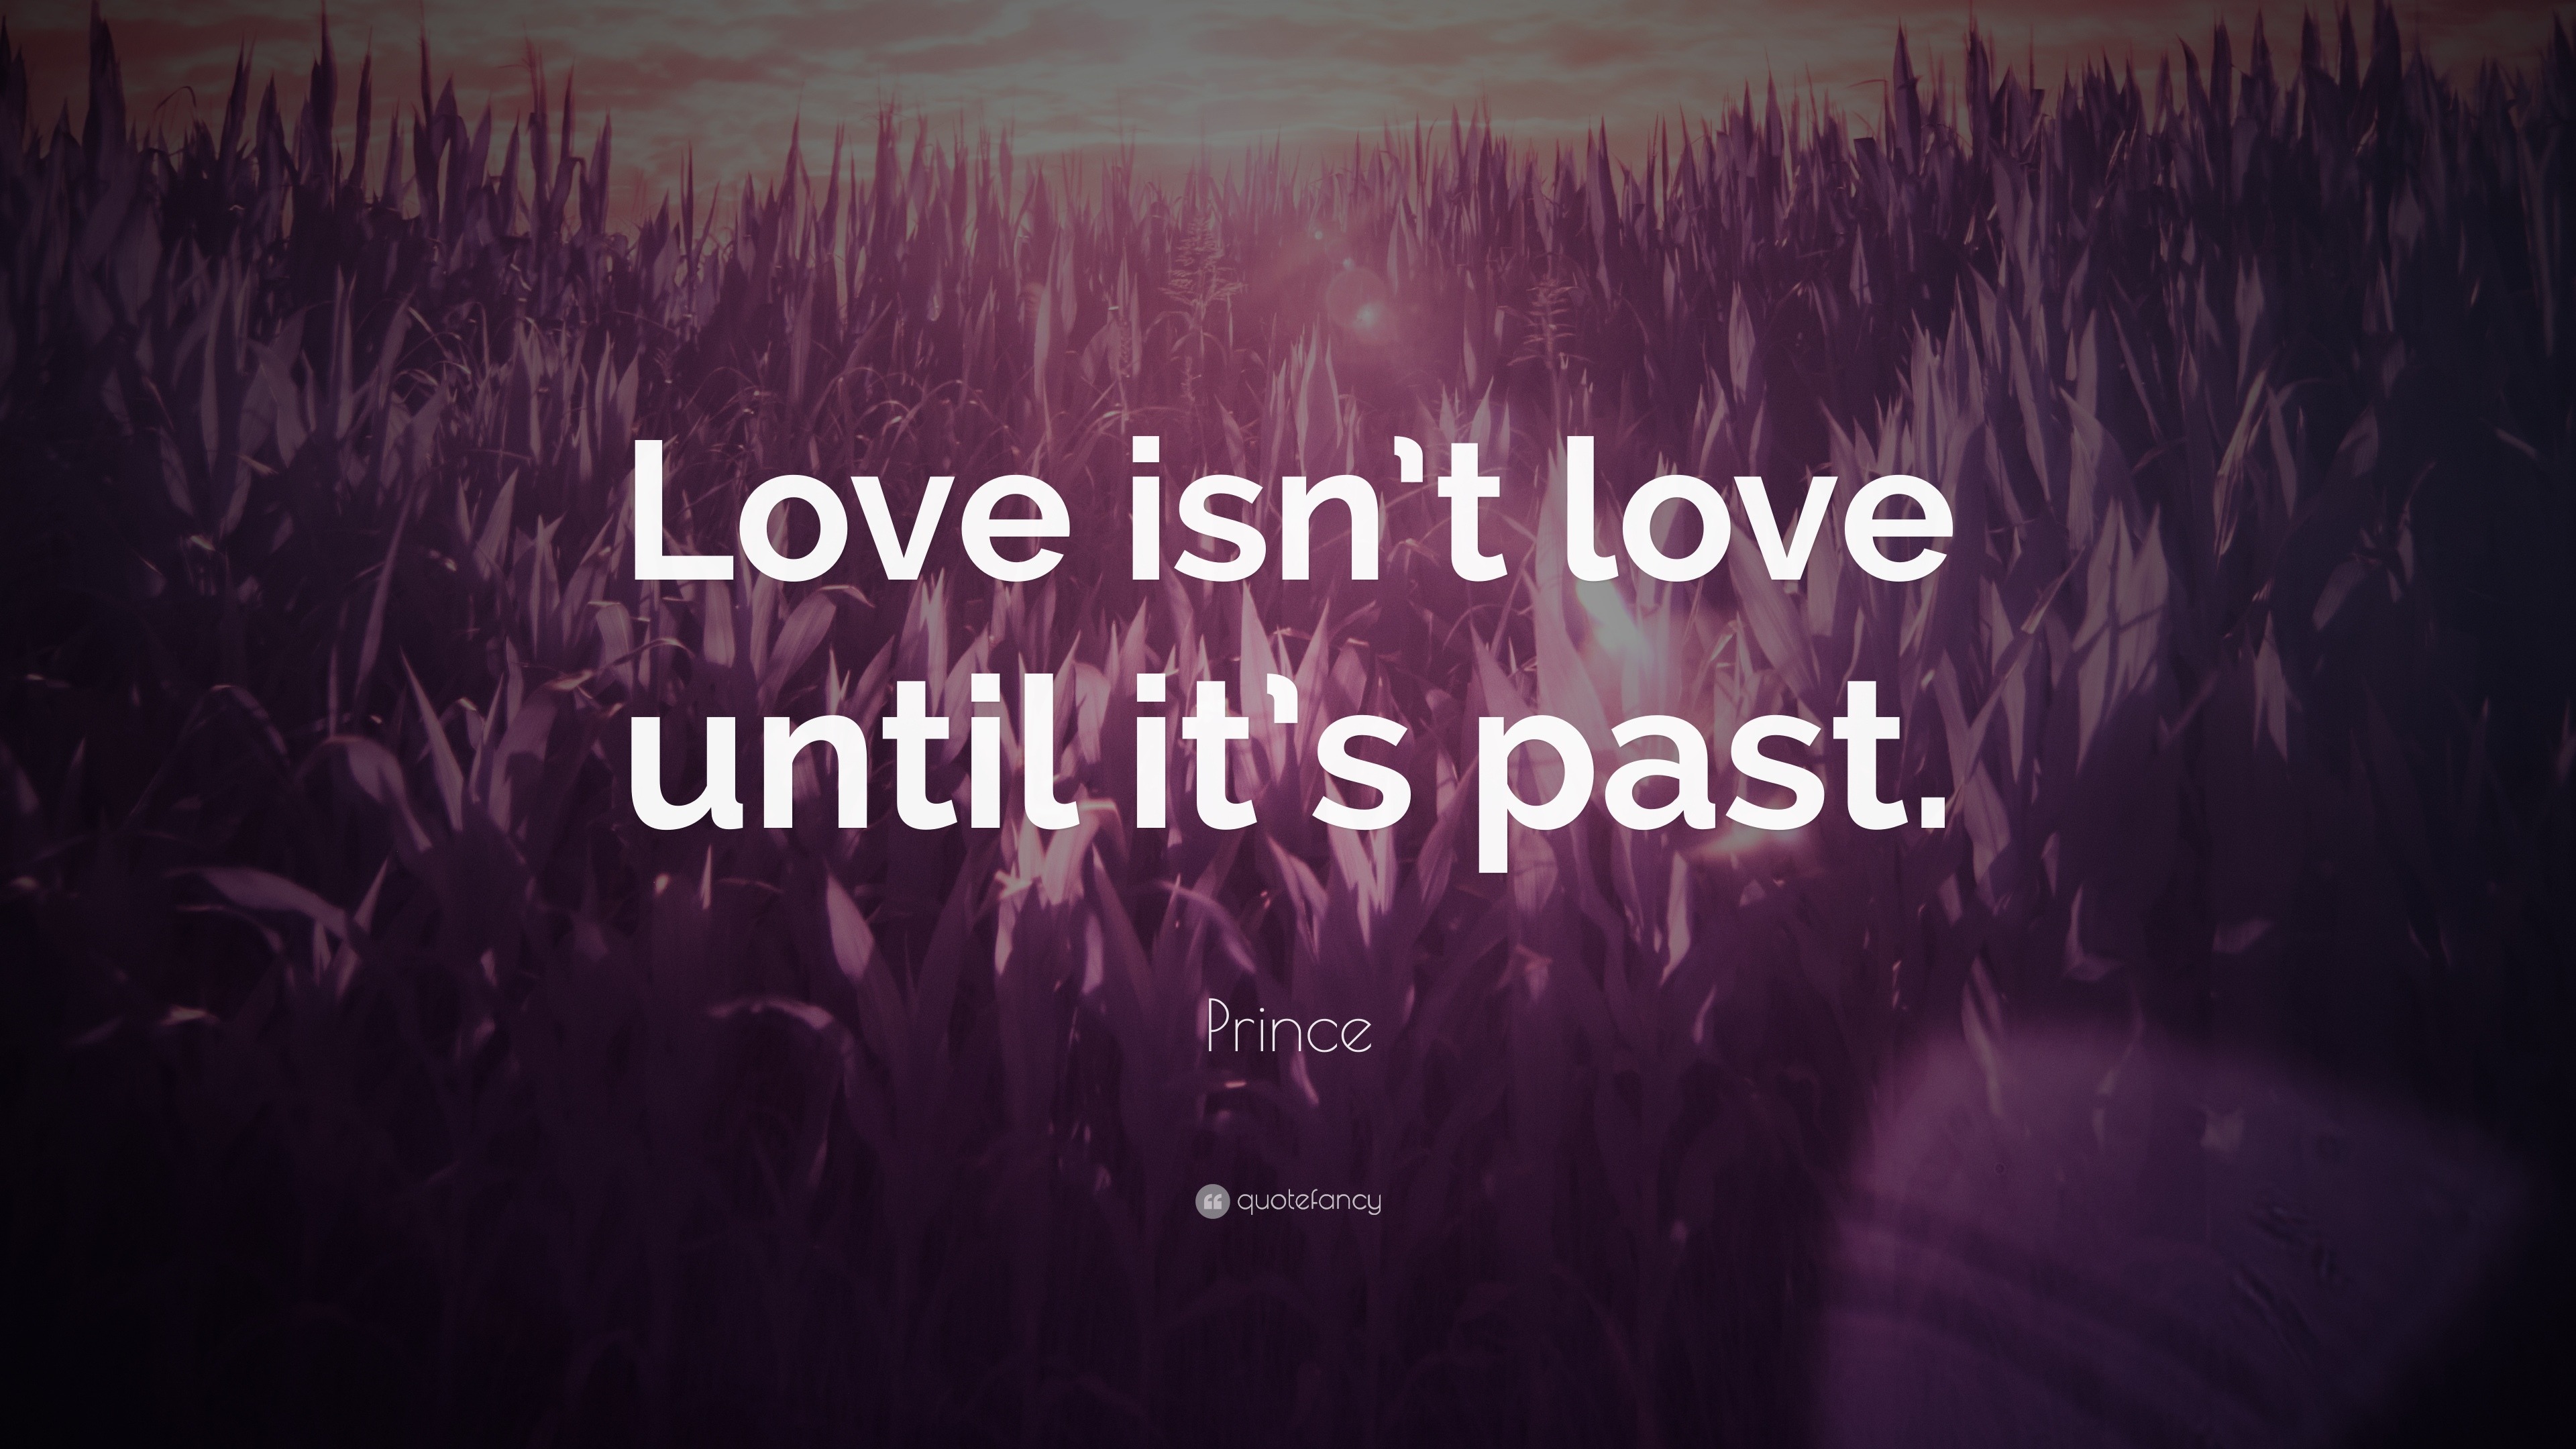 Prince Quote: “Love isn’t love until it’s past.”